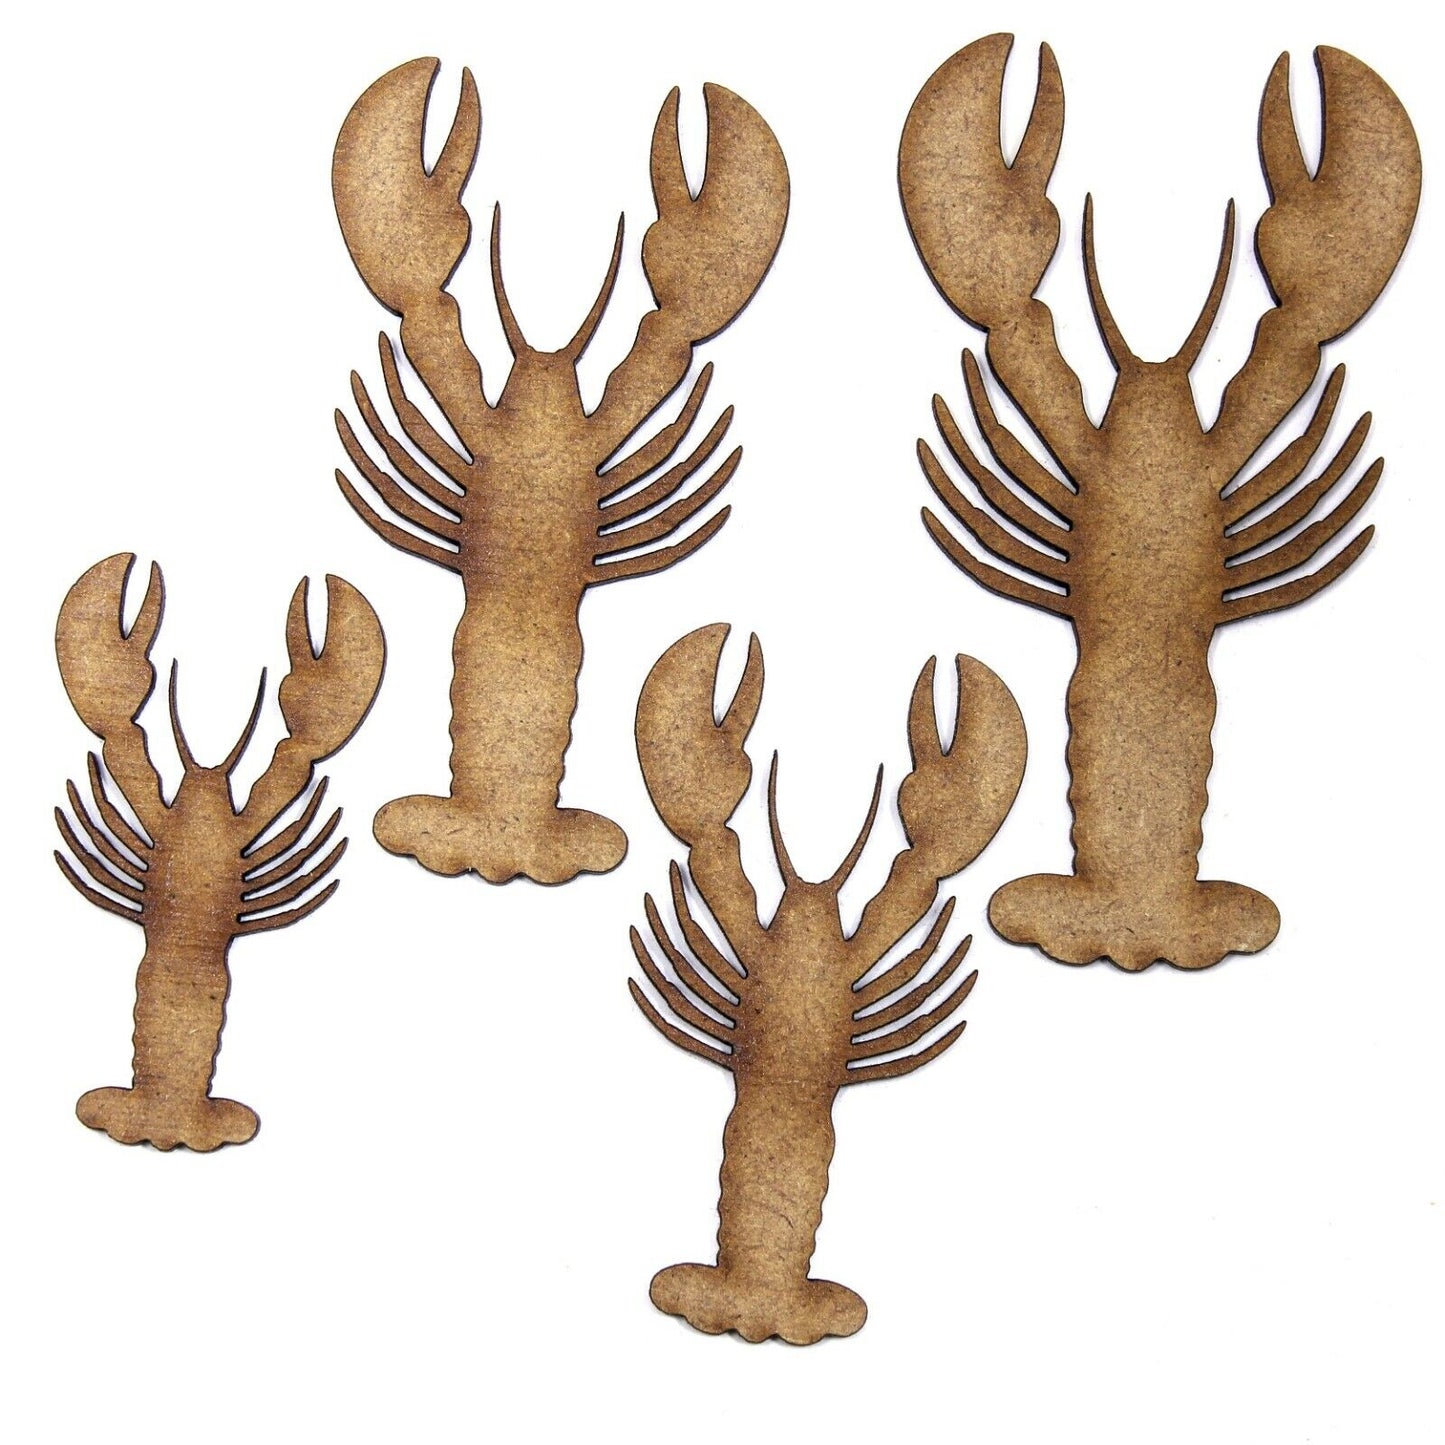 Lobster Craft Shapes. Various Sizes . 2mm MDF Wood. Seafood, Marine, Shellfish